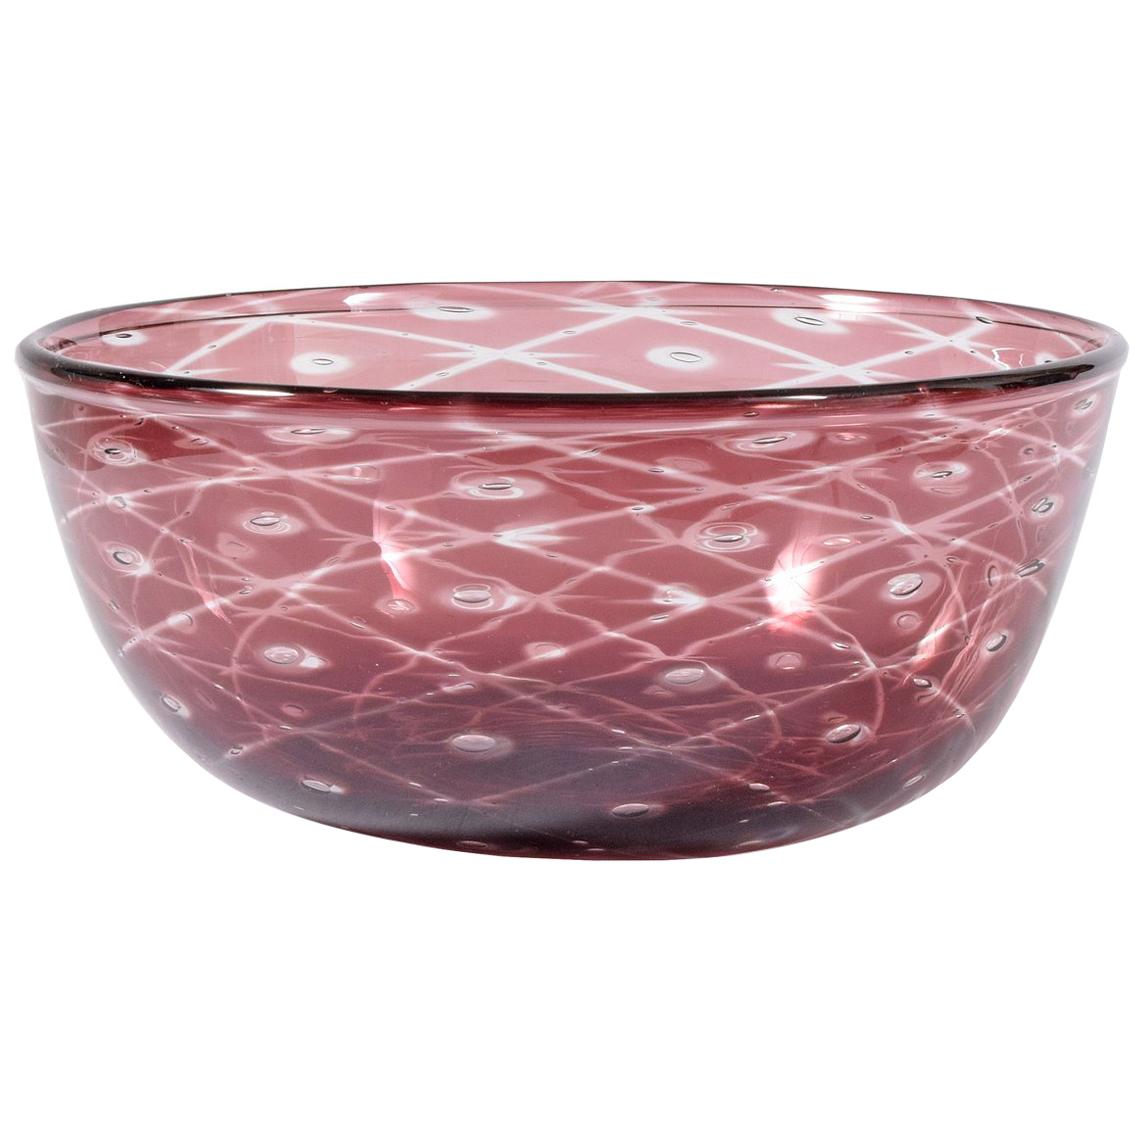 1939 Graal Bowl by Edward Hald for Orrefors For Sale